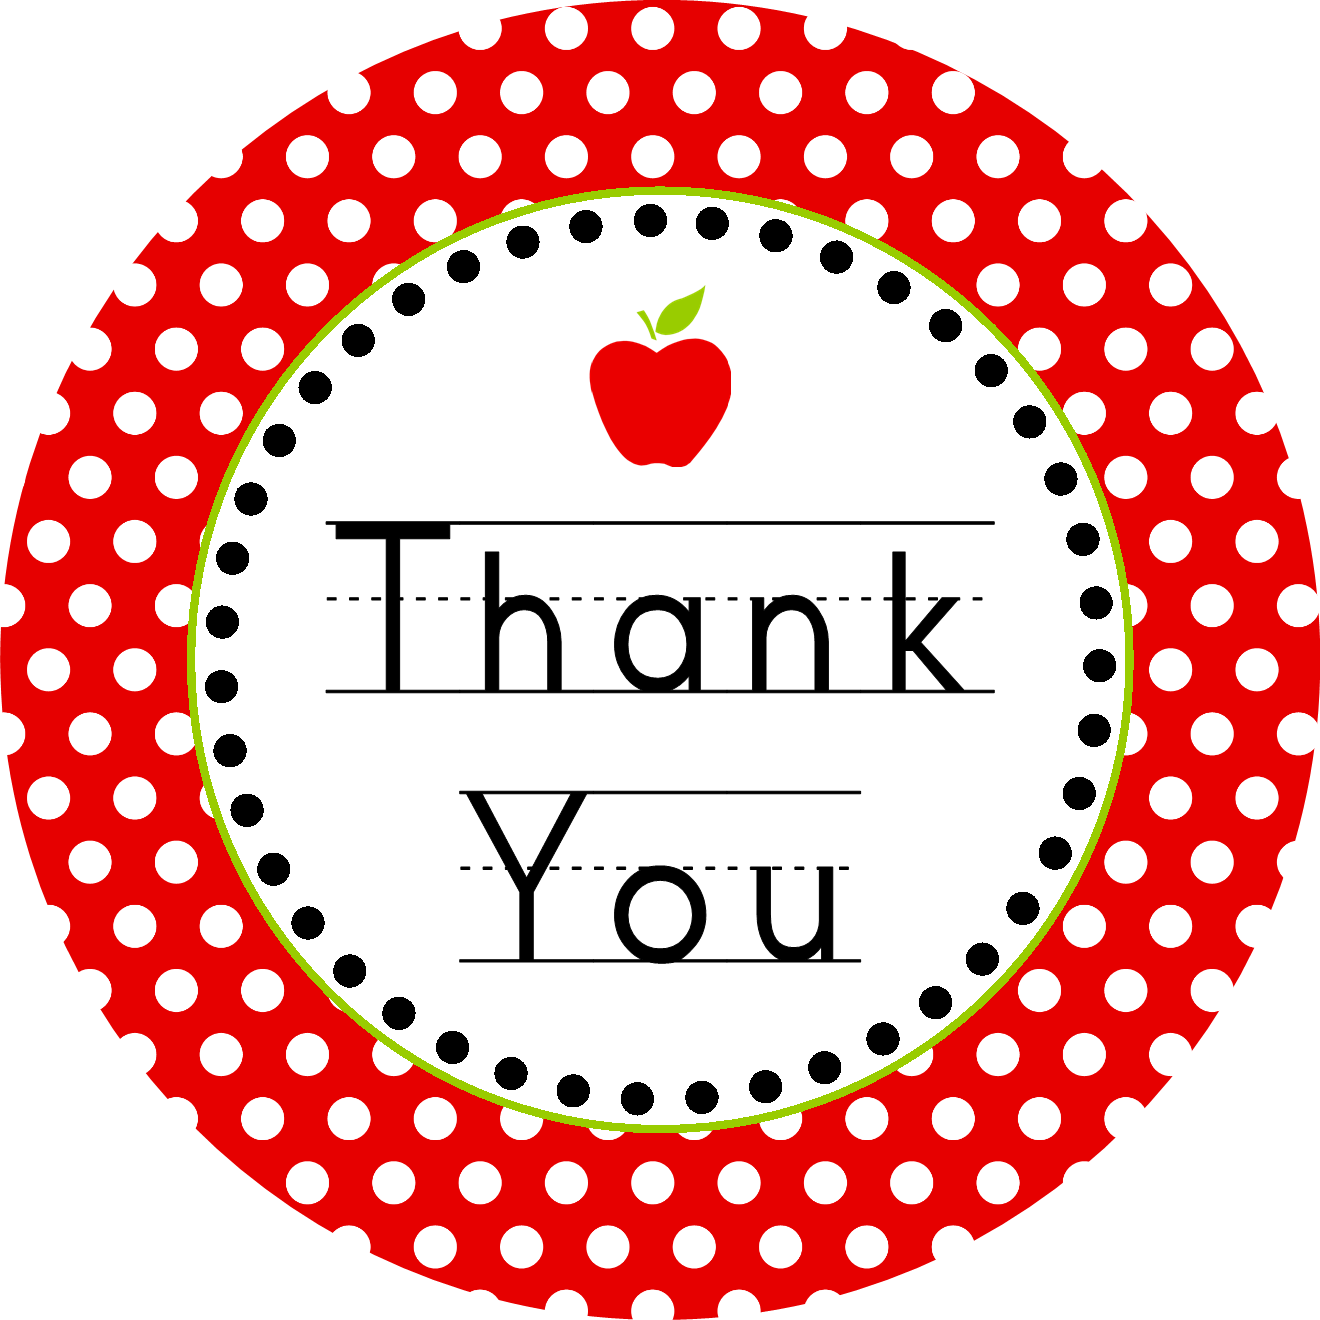 Thank You Volunteer Clipart | Free Download Clip Art | Free Clip ...